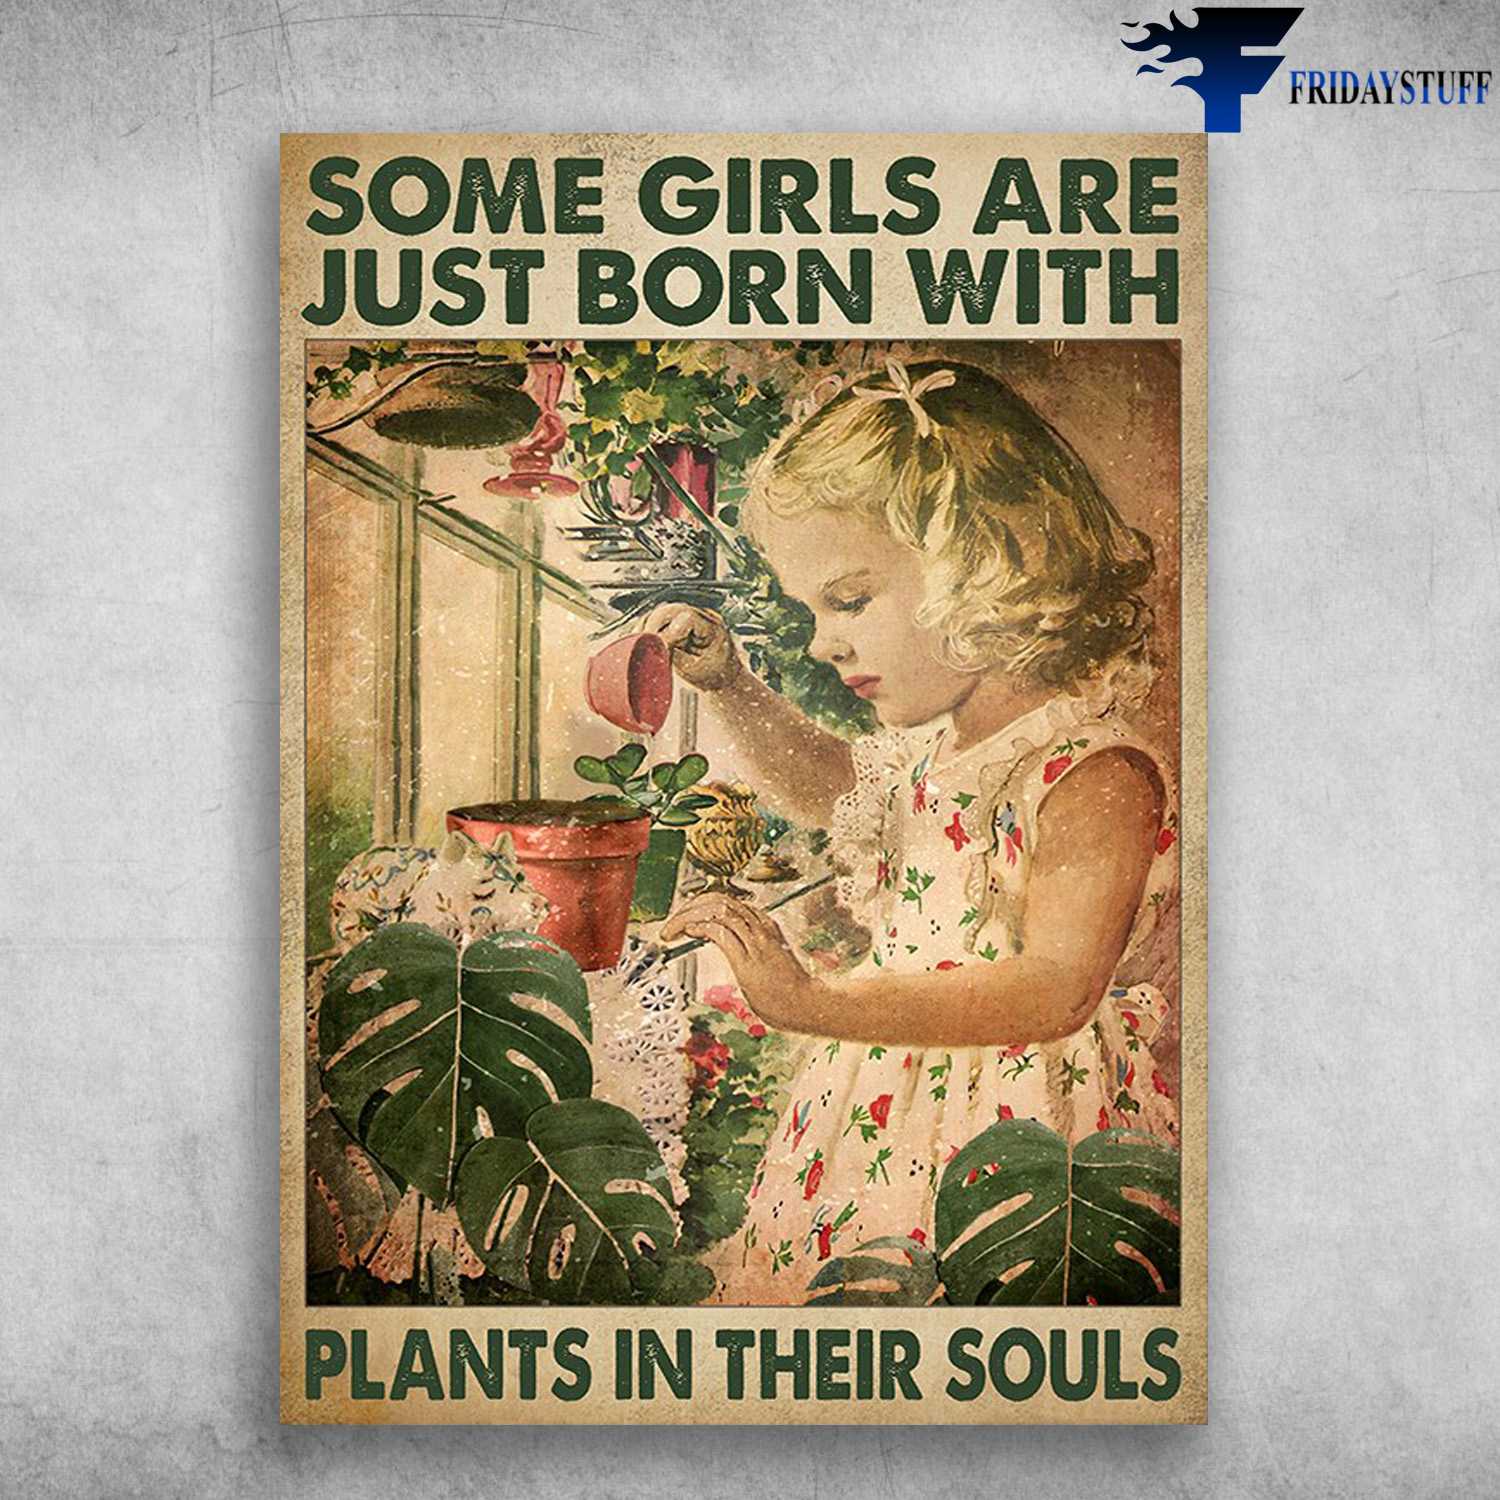 Gardening Girl, Plants Care - Some Girls Are Just Born With, Plants In Their Souls